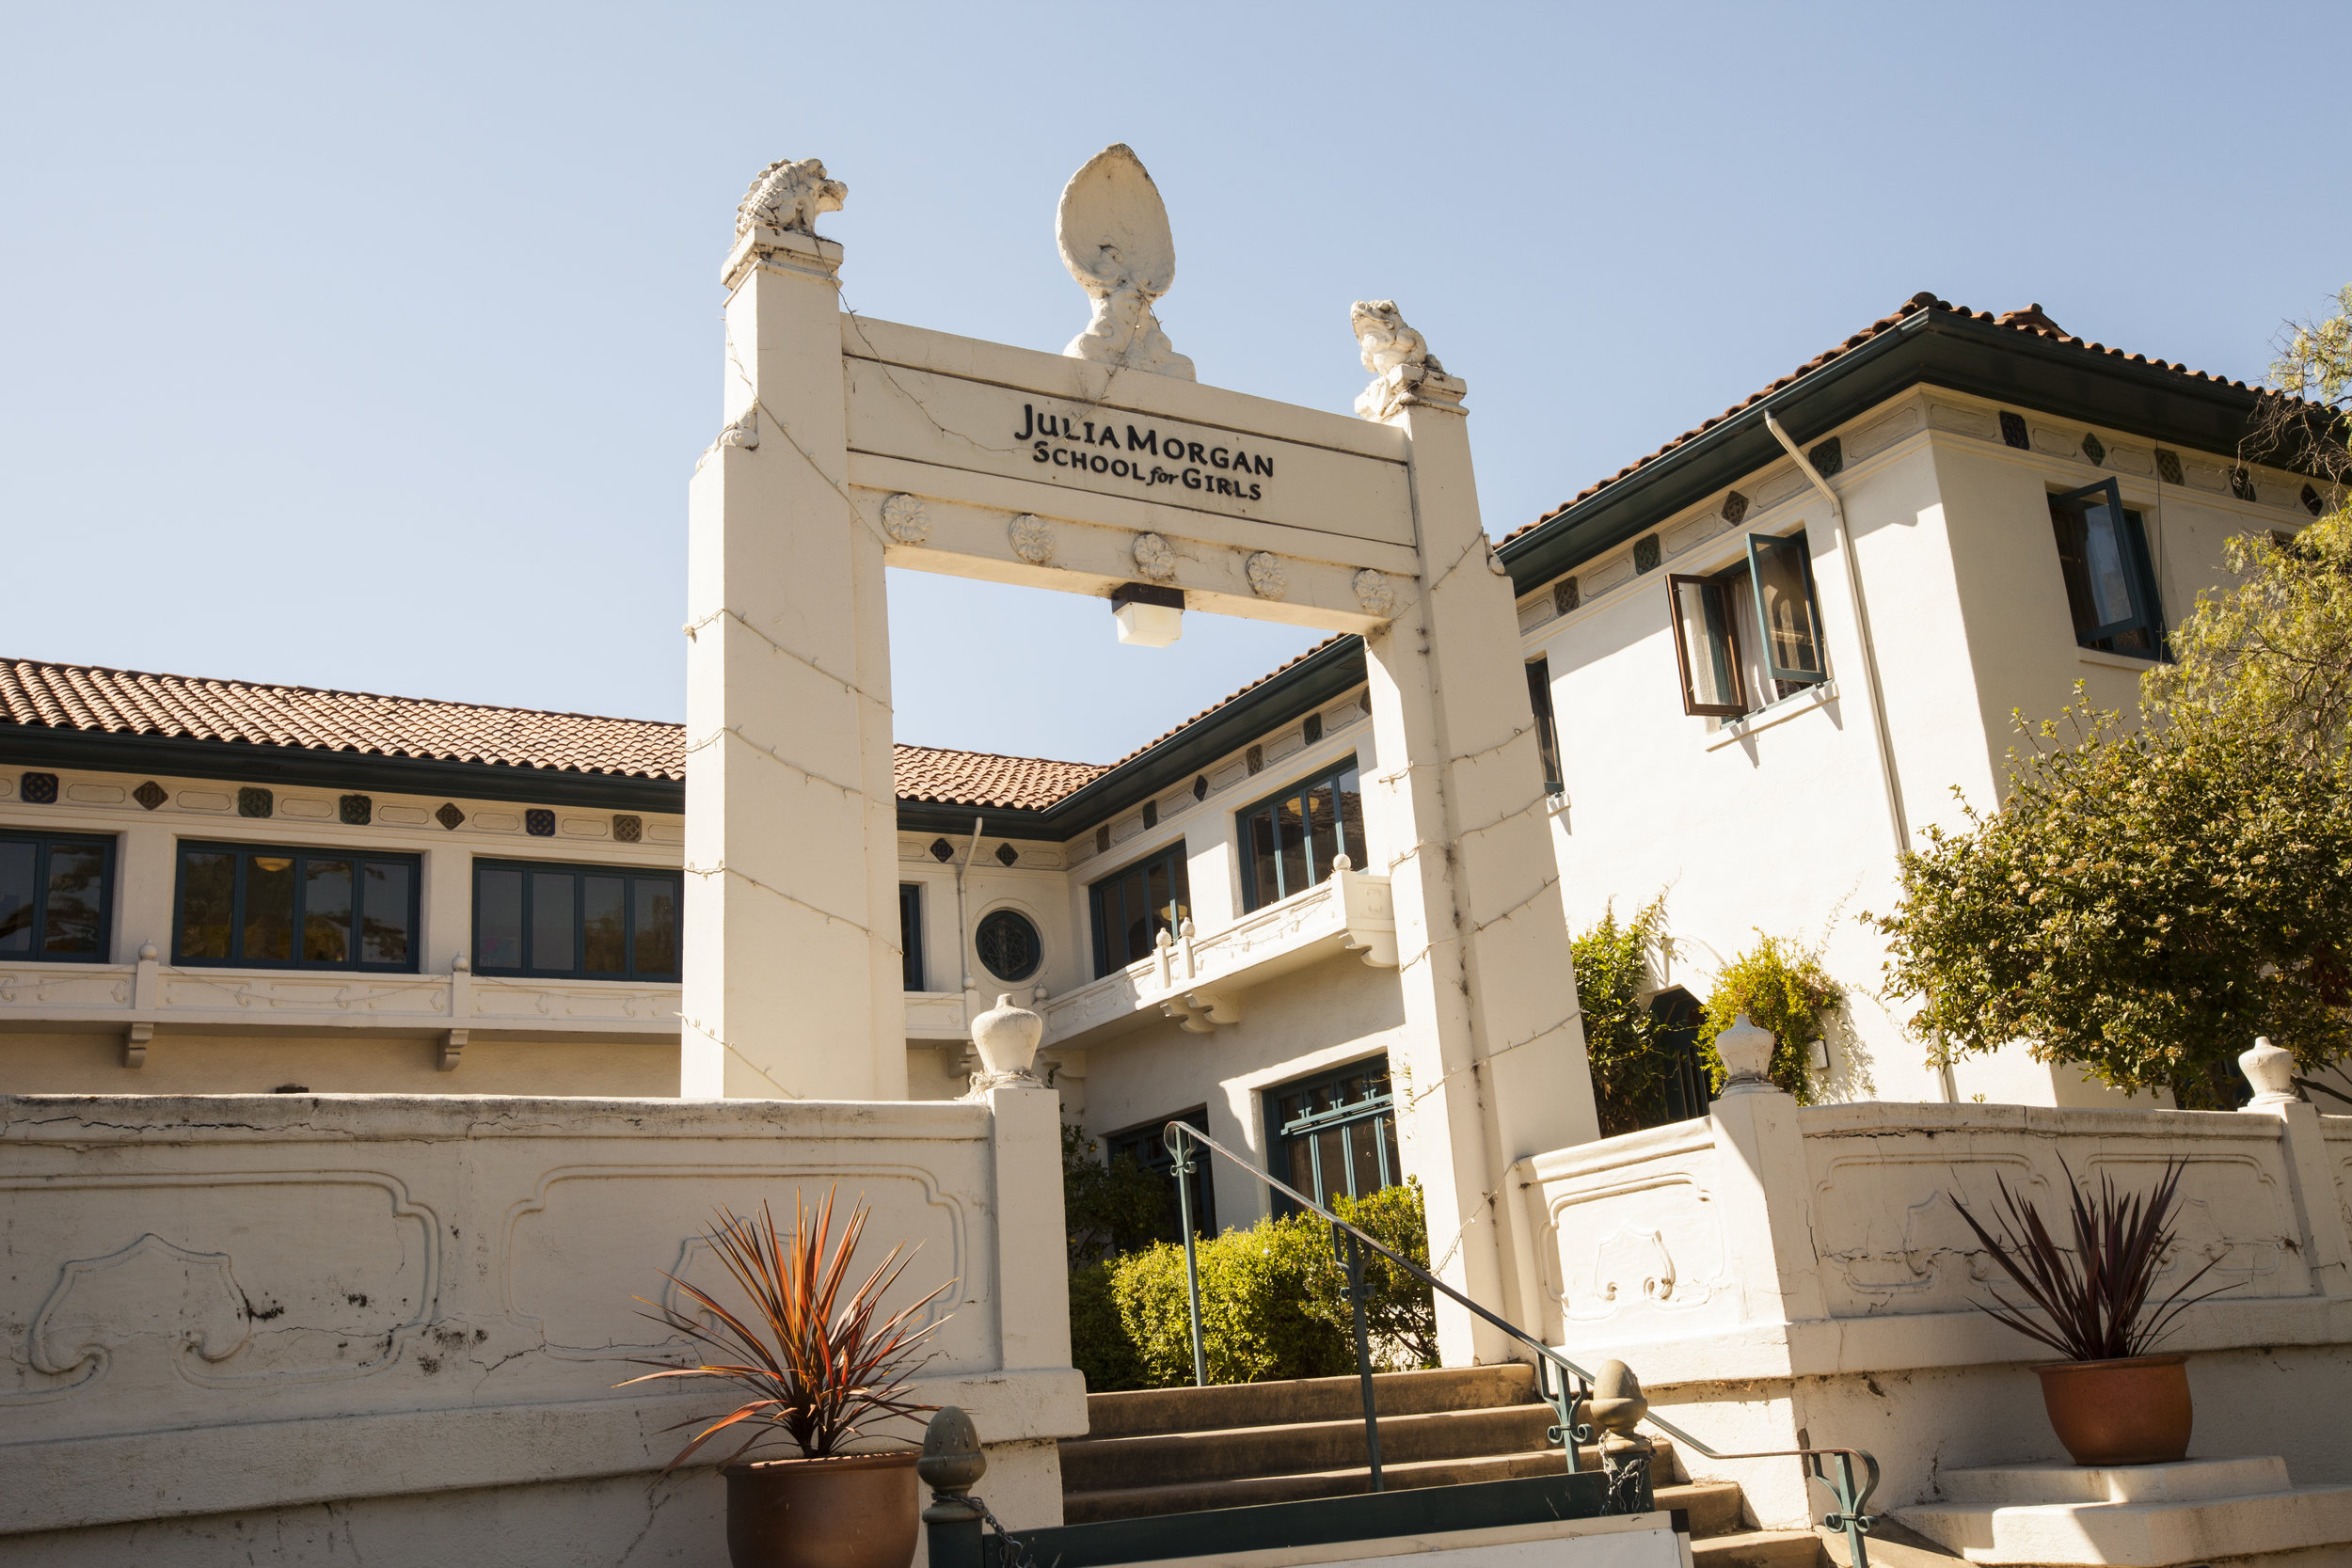  The front of the Julia Morgan School for Girls built in the 20's. We always take into consideration the entire building and environment when designing for a project. 